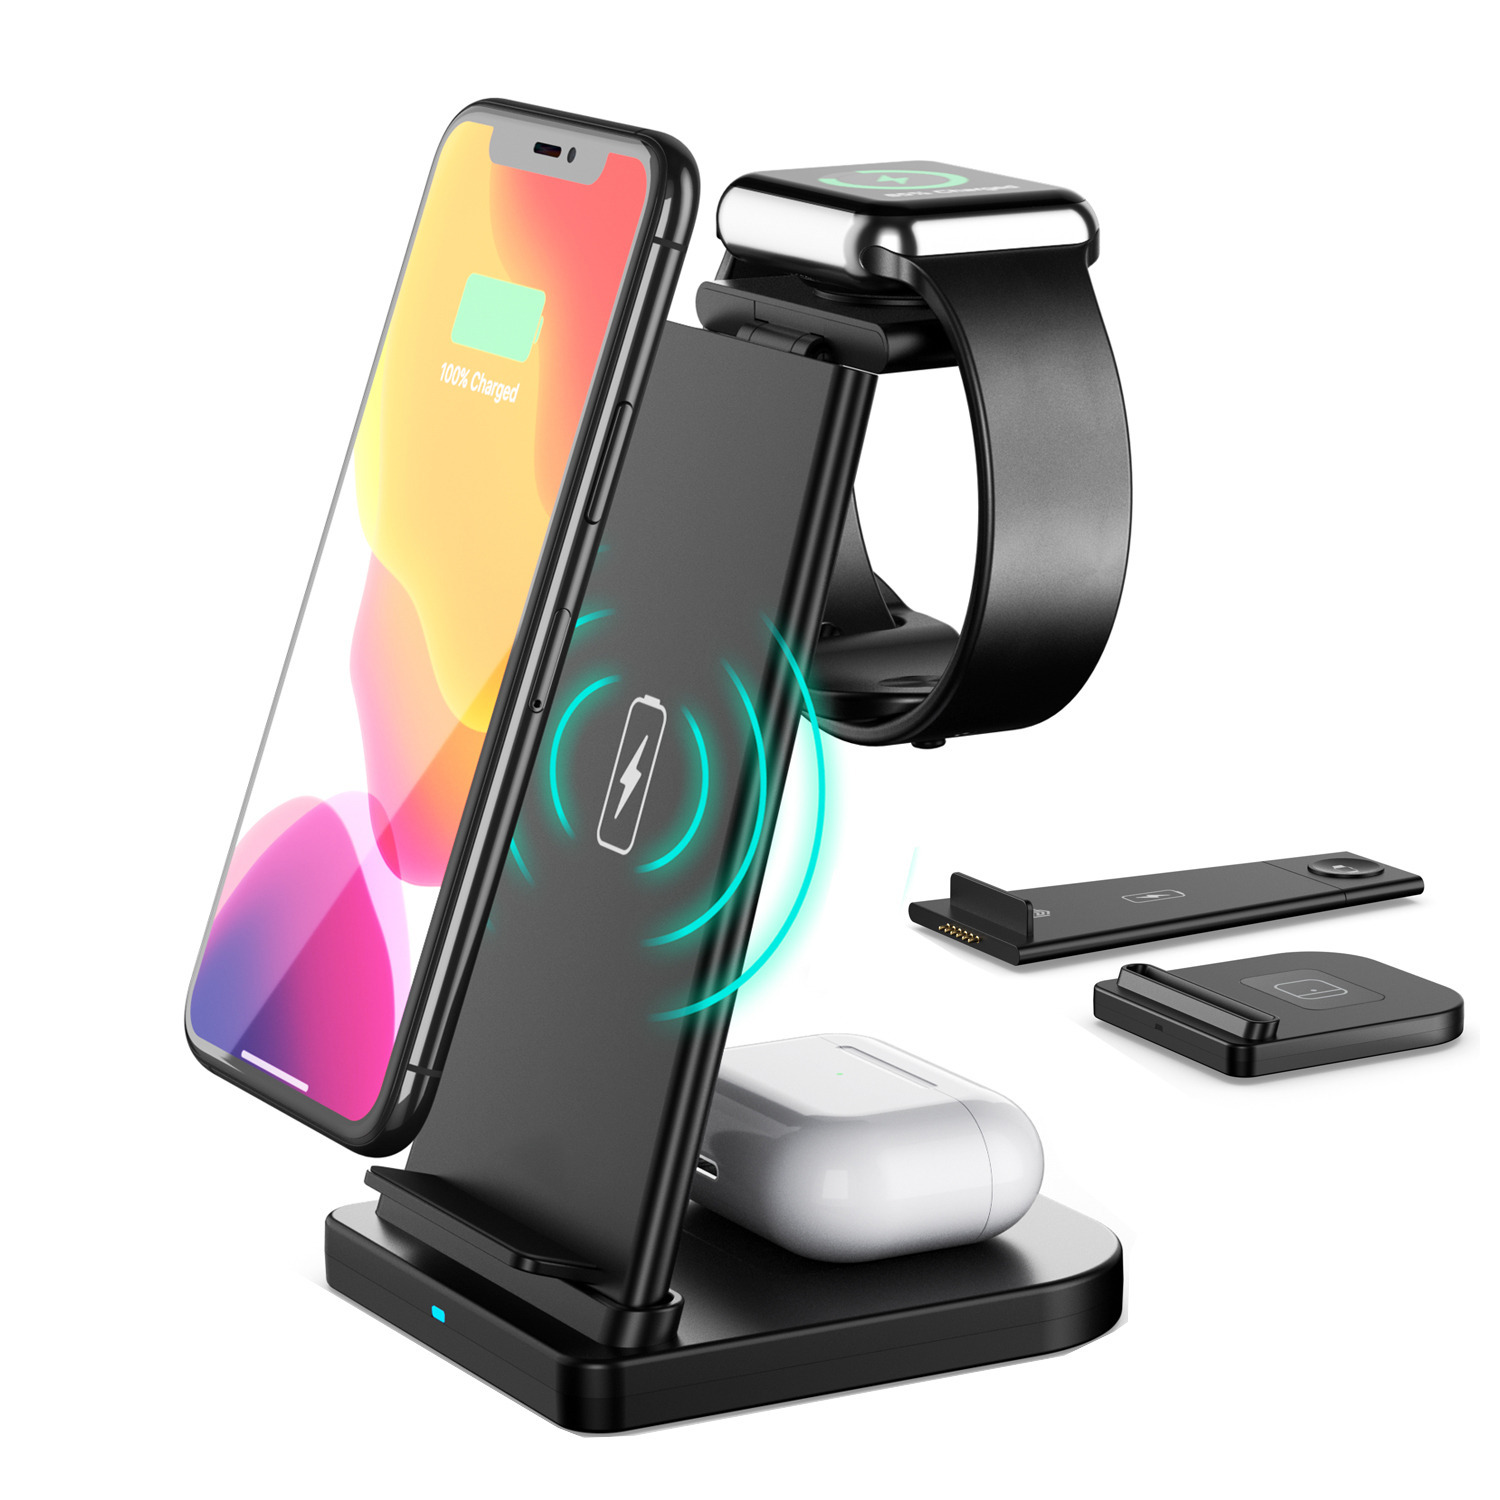 Smart Phone/Watch 3 in 1 Fast Wireless Charging Stand $18 + Free Shipping